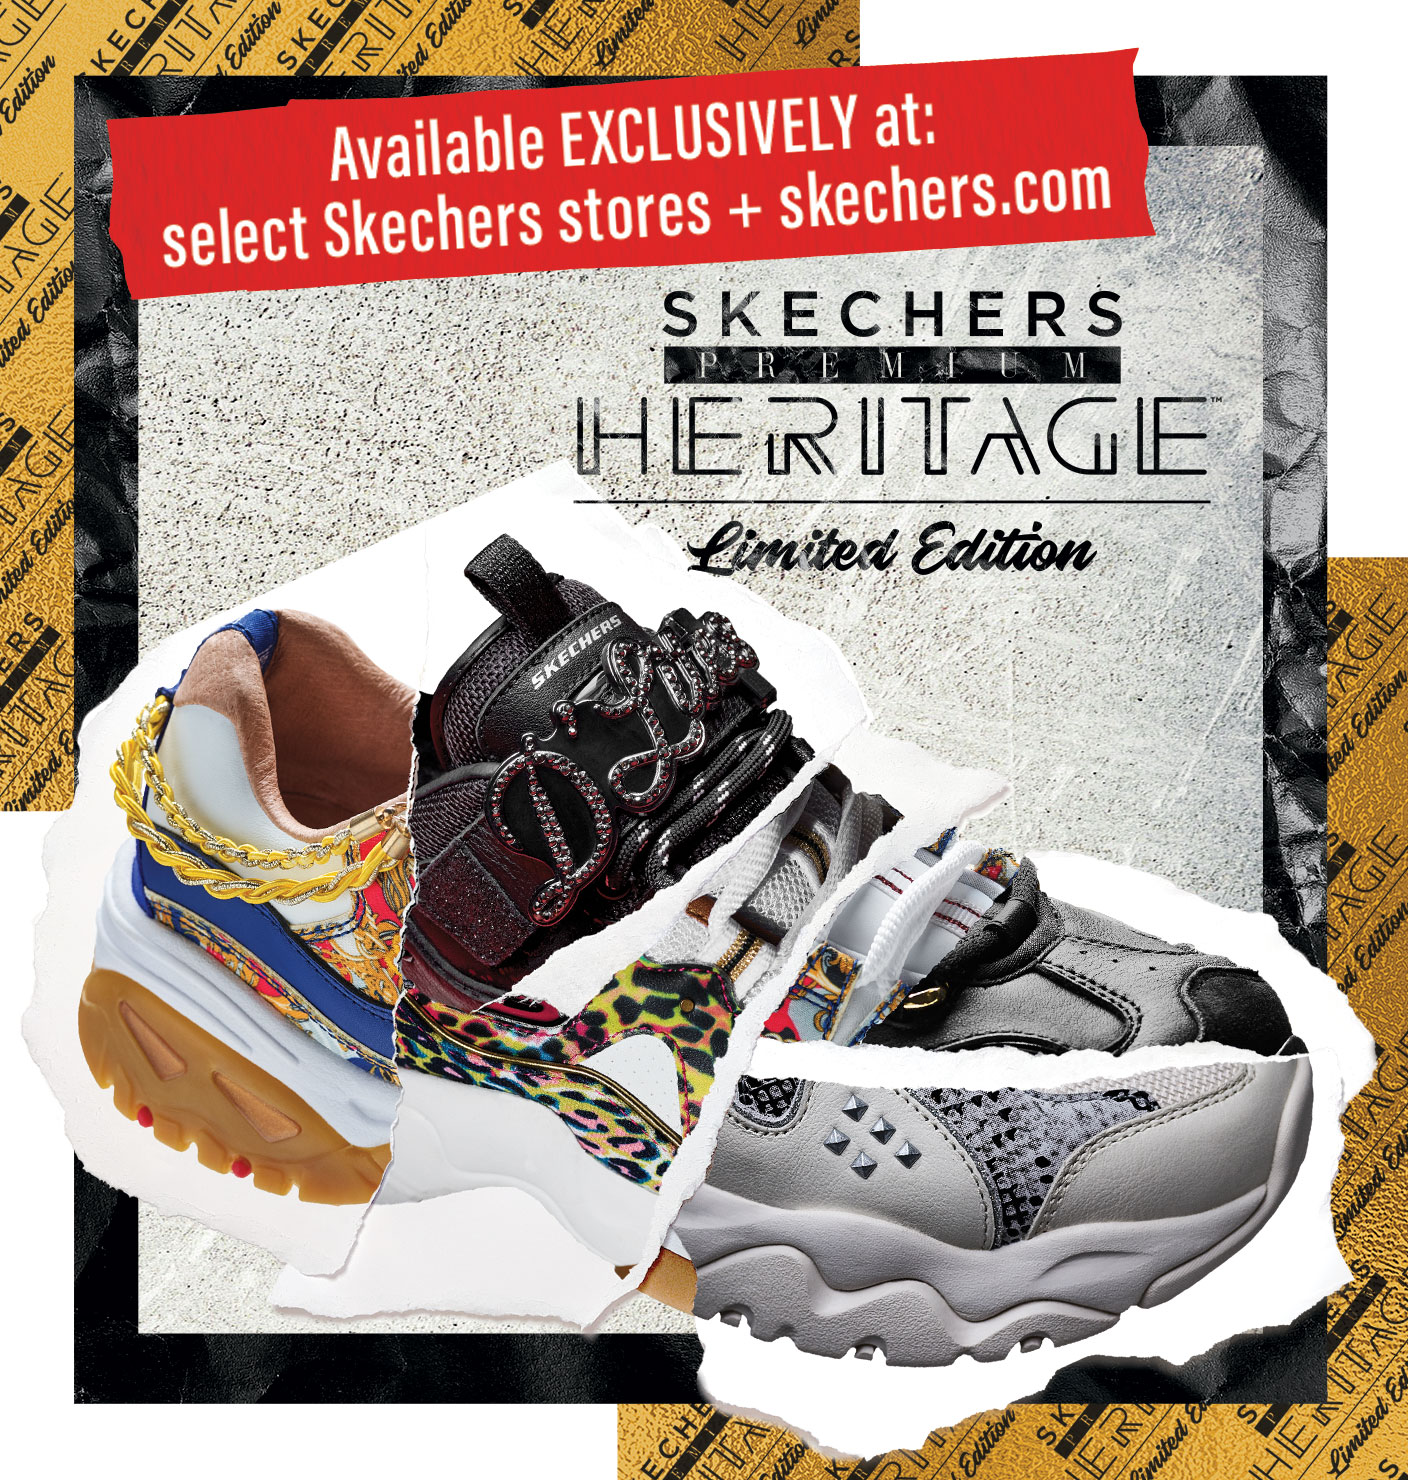 skechers outlet mn